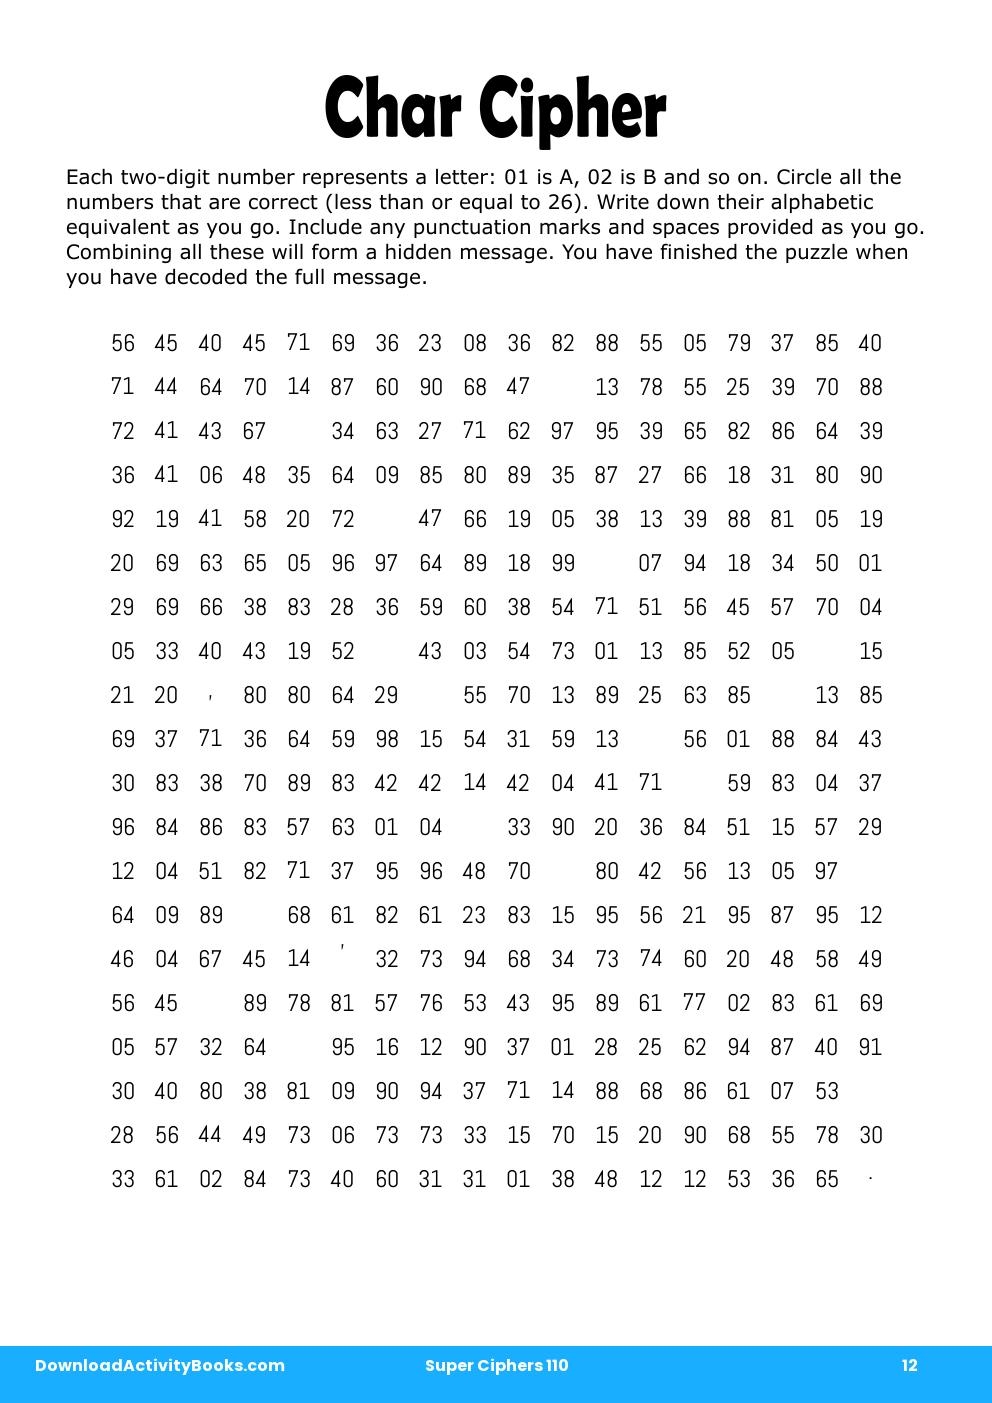 Char Cipher in Super Ciphers 110